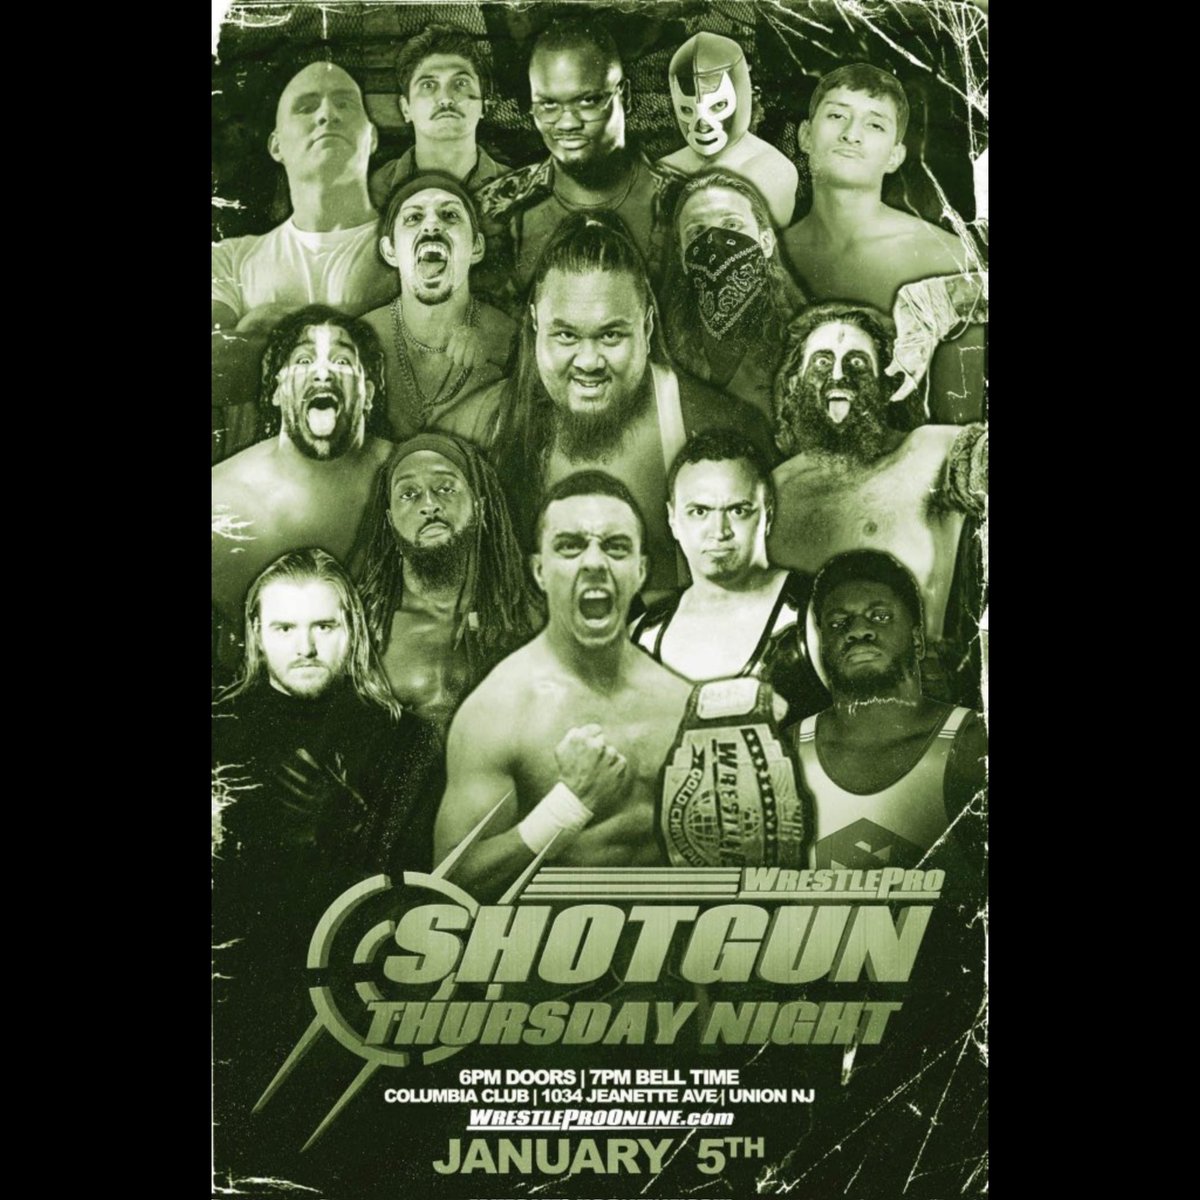 The #AceOfSpaceAcademy is in full effect tonight!!! Shotgun Thursday Night! Ready or not, here we come! Nothing personal, just ACADEMY BIZNESS!
‼️COME ON BABY‼️
🚀🌙🦅
#ThePhoenix #GKM #Moonshot #MSG #AceOfSpace #LSG
 #wrestlepro #SHOTGUNTHURSDAYNIGHT